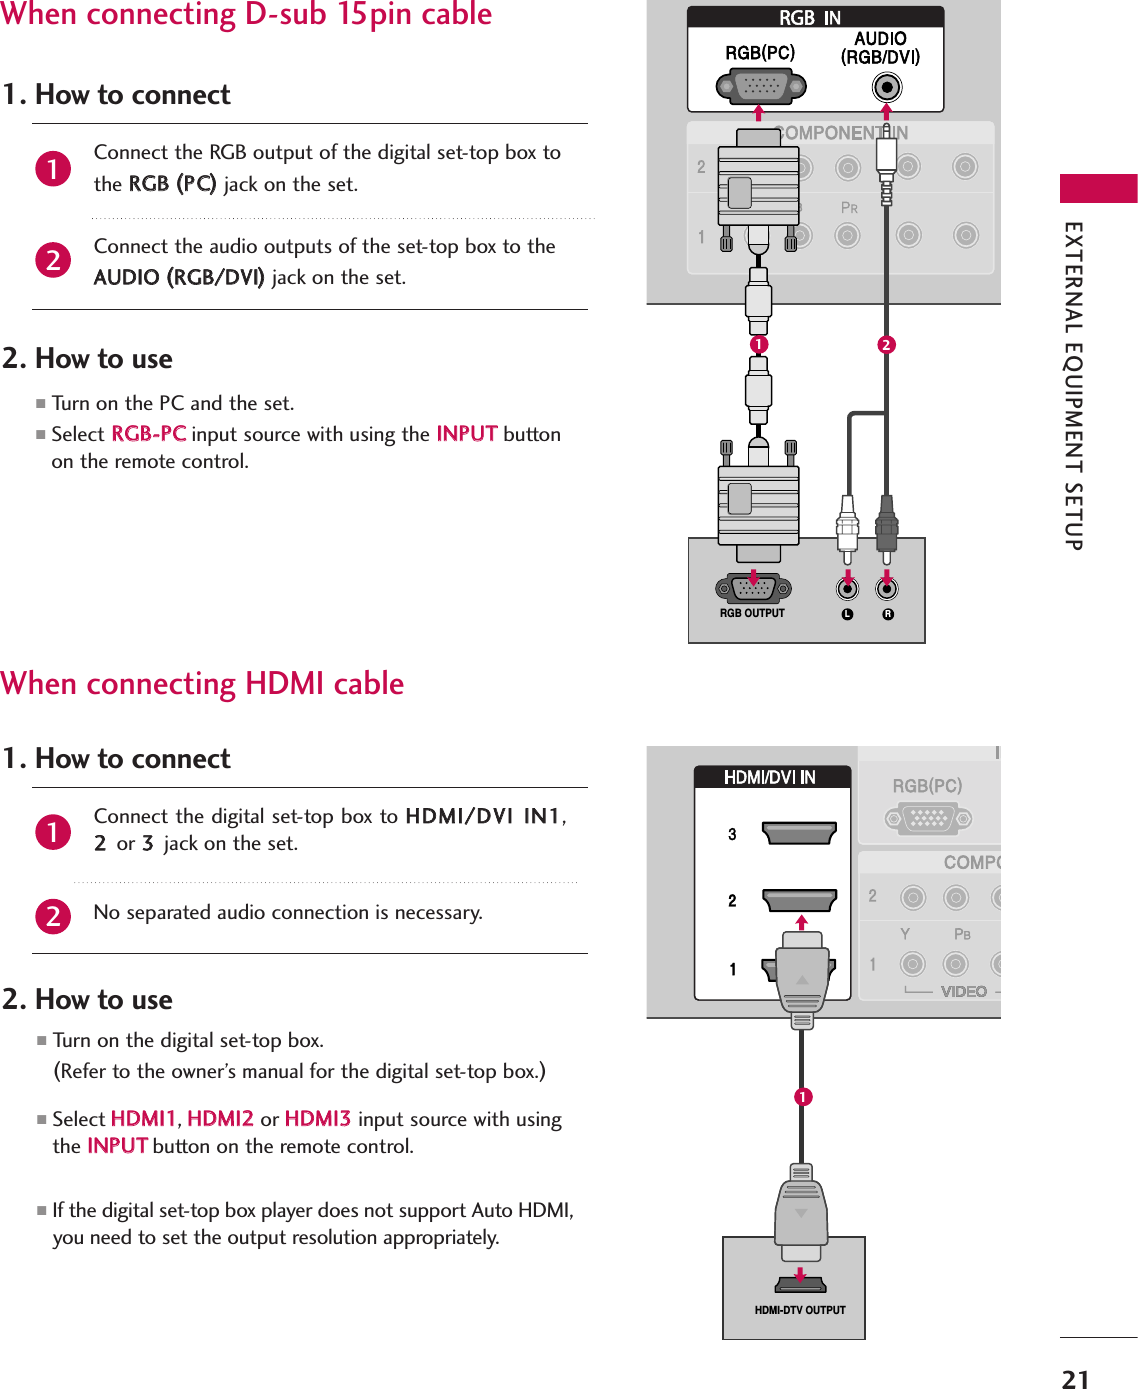 When connecting D-sub 15pin cable(DVI)(DVI)RGBL RRGB OUTPUT(DVI)(DVI)VI)HDMI-DTV OUTPUTRGBConnect the RGB output of the digital set-top box to the RRGGBB  ((PPCC))jack on the set.Connect the audio outputs of the set-top box to the AAUUDDIIOO  ((RRGGBB//DDVVII))jack on the set.1. How to connect2. How to use■Turn  on  the  PC  and  the  set.  ■Select RRGGBB--PPCCinput source with using the IINNPPUUTTbuttonon the remote control.When connecting HDMI cableConnect the digital set-top box to HHDDMMII//DDVVII  IINN11,22  or 33  jack on the set.No separated audio connection is necessary.1. How to connect2. How to use■Turn  on  the  digital  set-top  box.  (Refer to the owner’s manual for the digital set-top box.)■Select HHDDMMII11,HHDDMMII22  or HHDDMMII33input source with usingthe IINNPPUUTTbutton on the remote control.■If the digital set-top box player does not support Auto HDMI,you need to set the output resolution appropriately.2121EXTERNAL EQUIPMENT SETUP21121